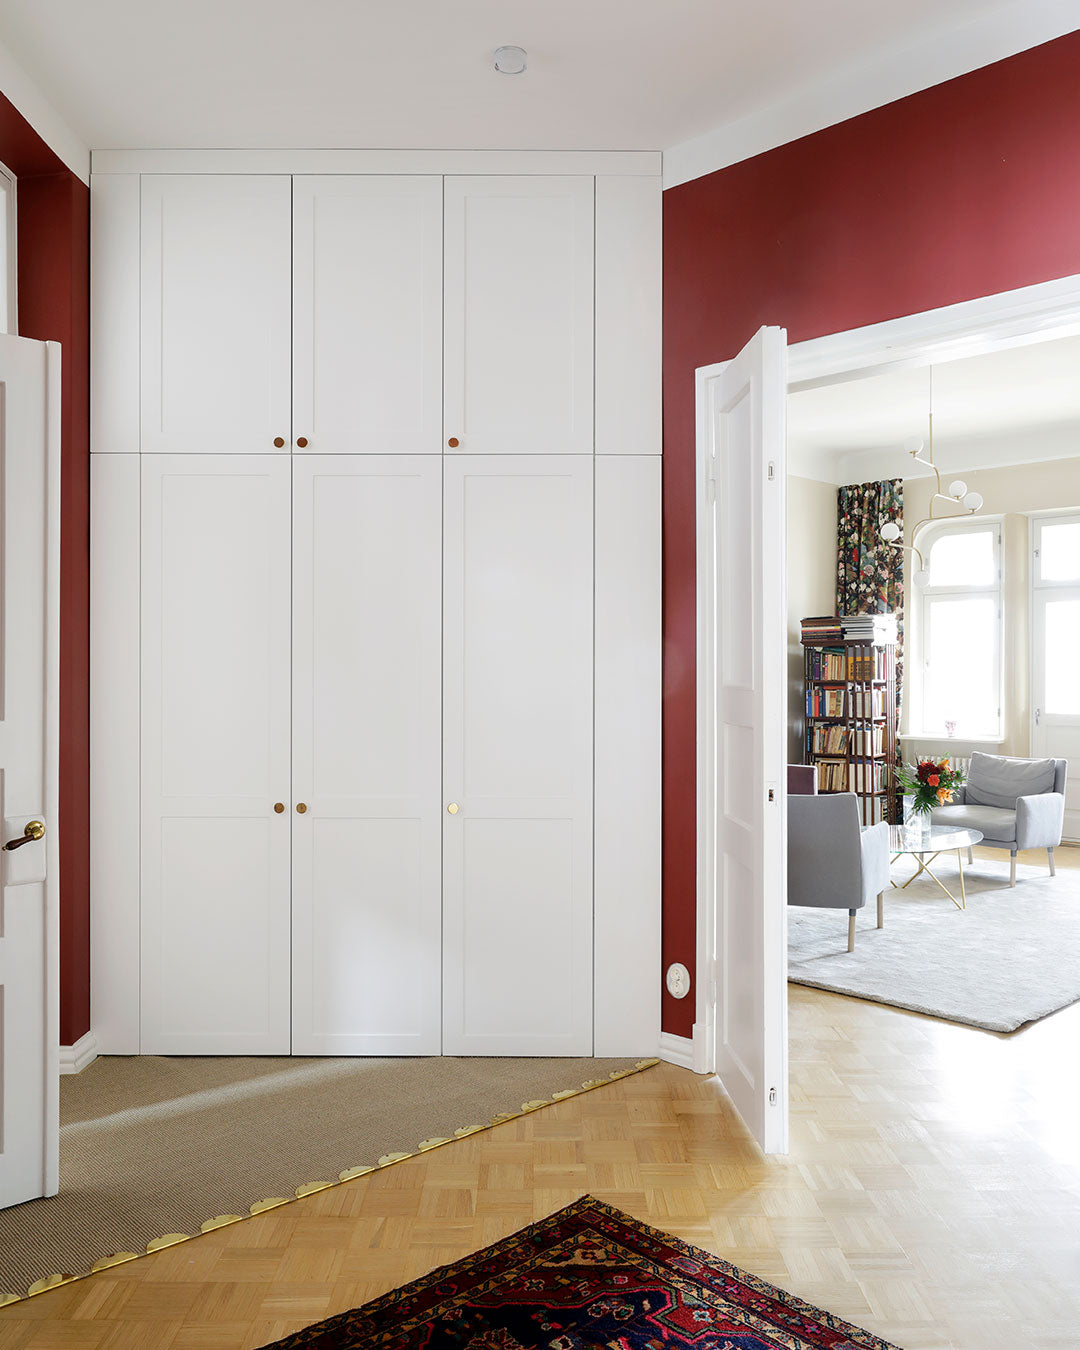 A.S.Helsingö Ensiö wardrobe in natural white colour with Parasol handles